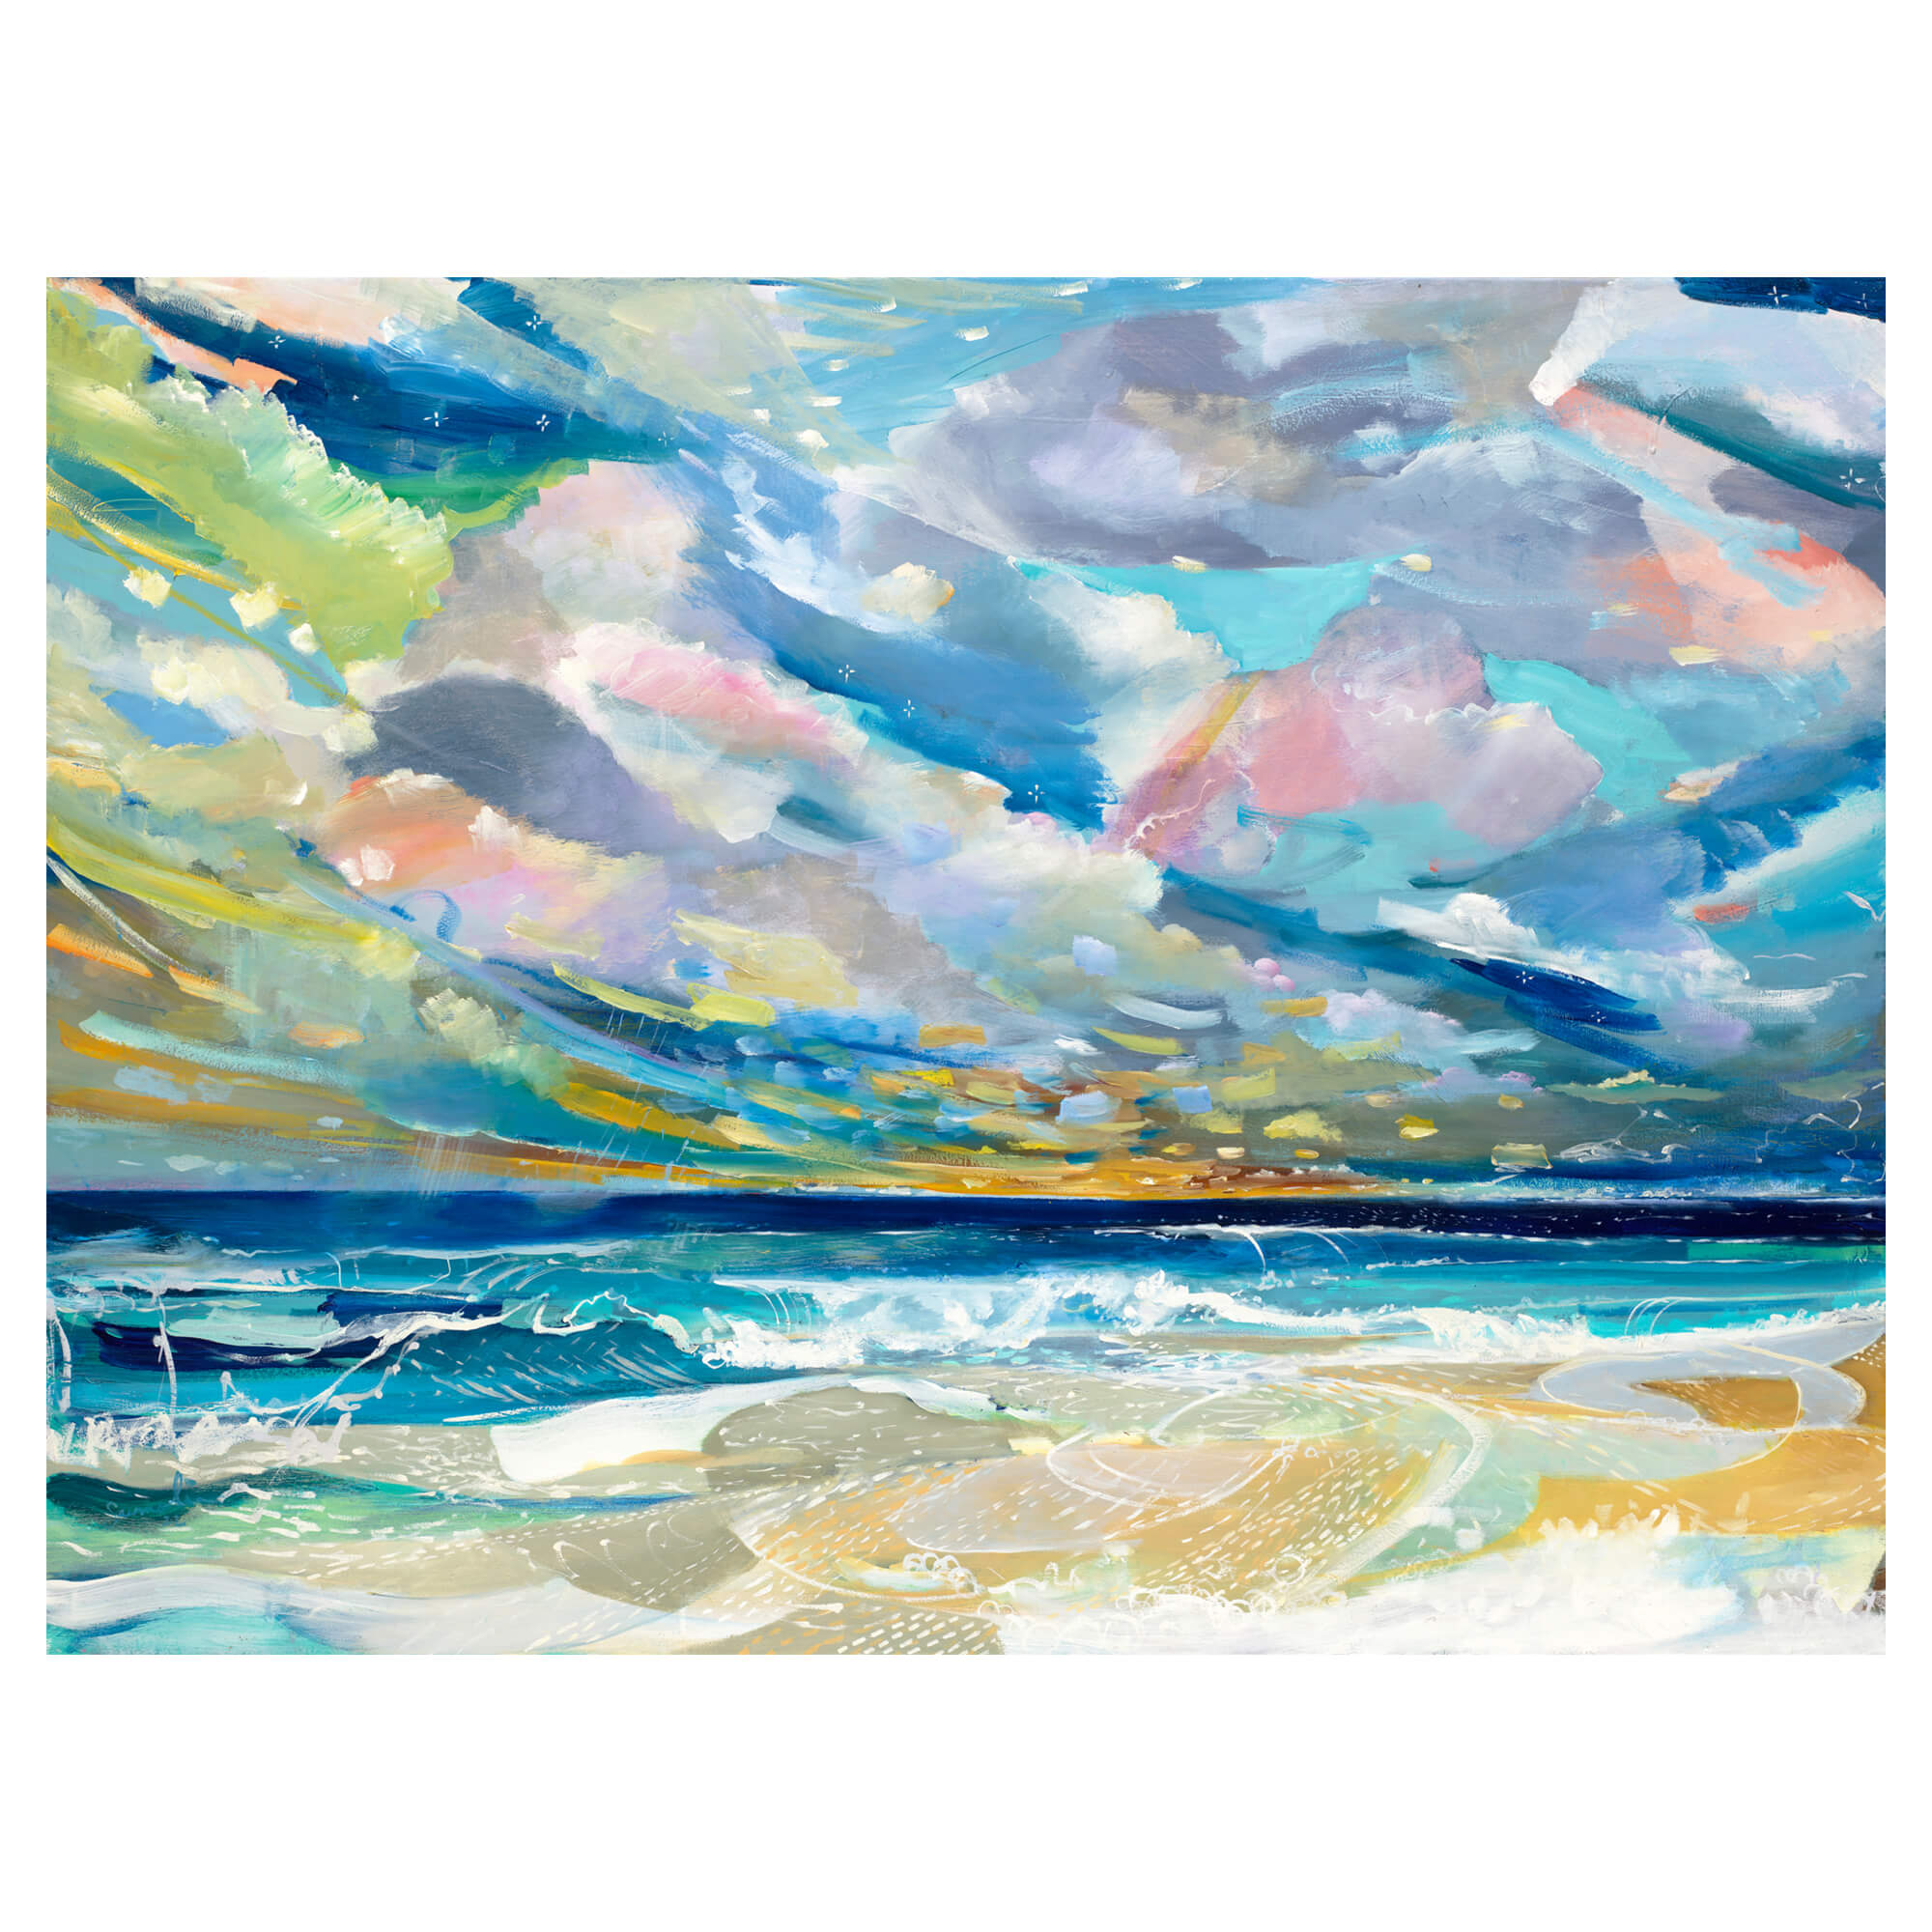 A canvas giclée art print featuring a colorful abstract ocean view by famed Hawaii artist Saumolia Puapuaga